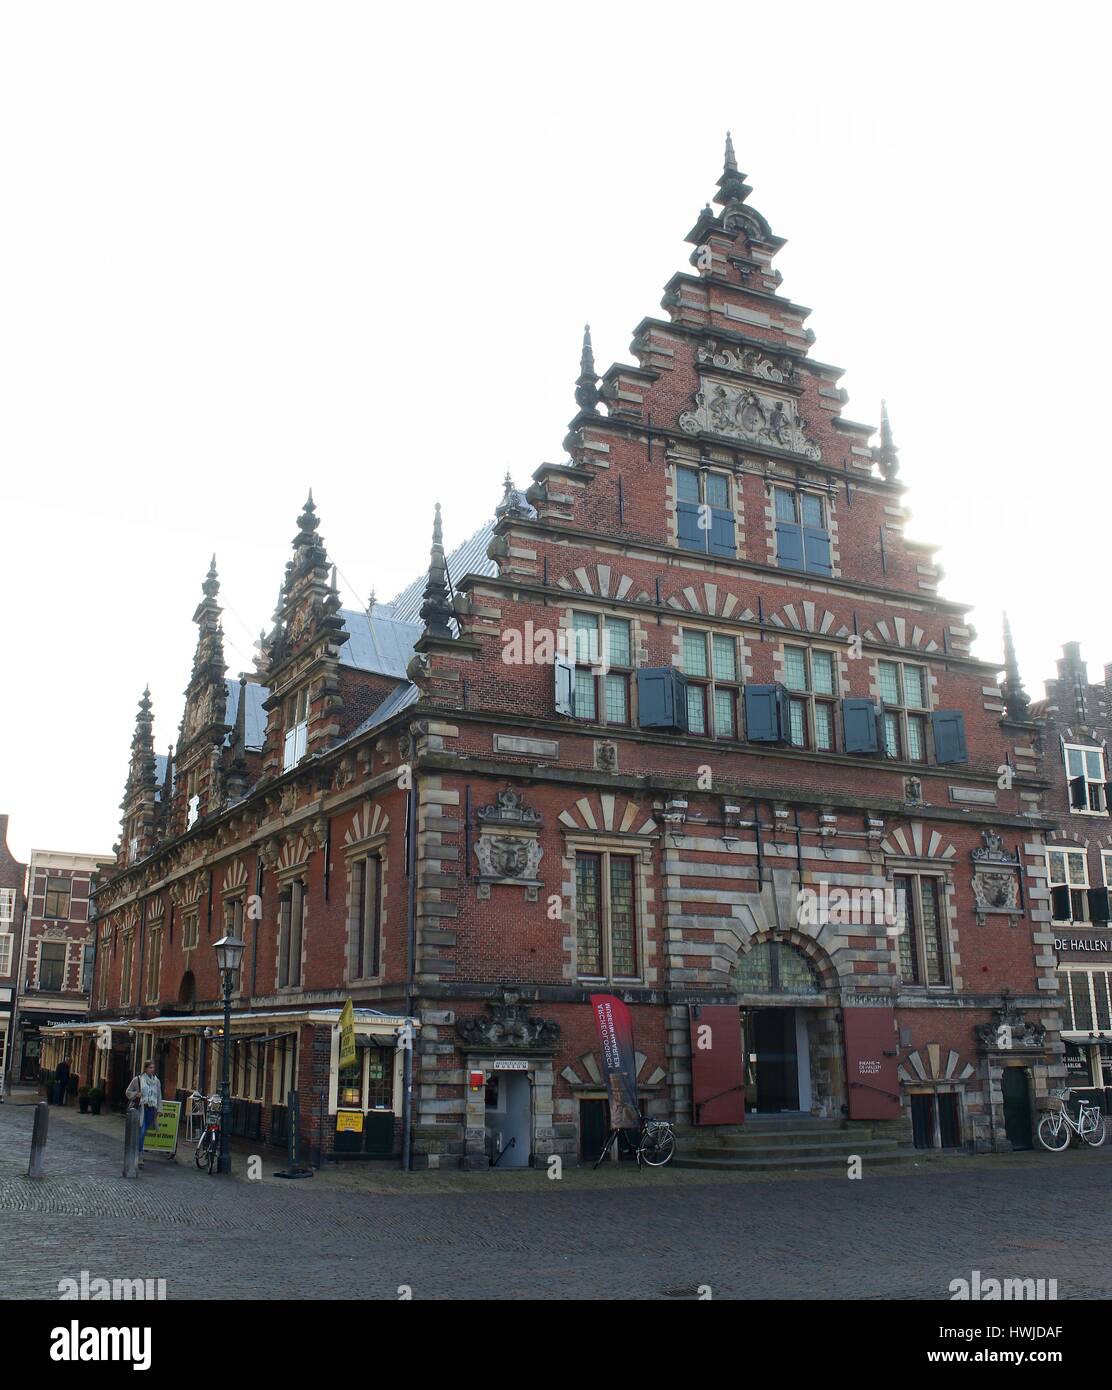 17th century Vleeshal (Meat Hall - museum) at Grote Markt square, Haarlem, The Netherlands (stitched image) Stock Photo